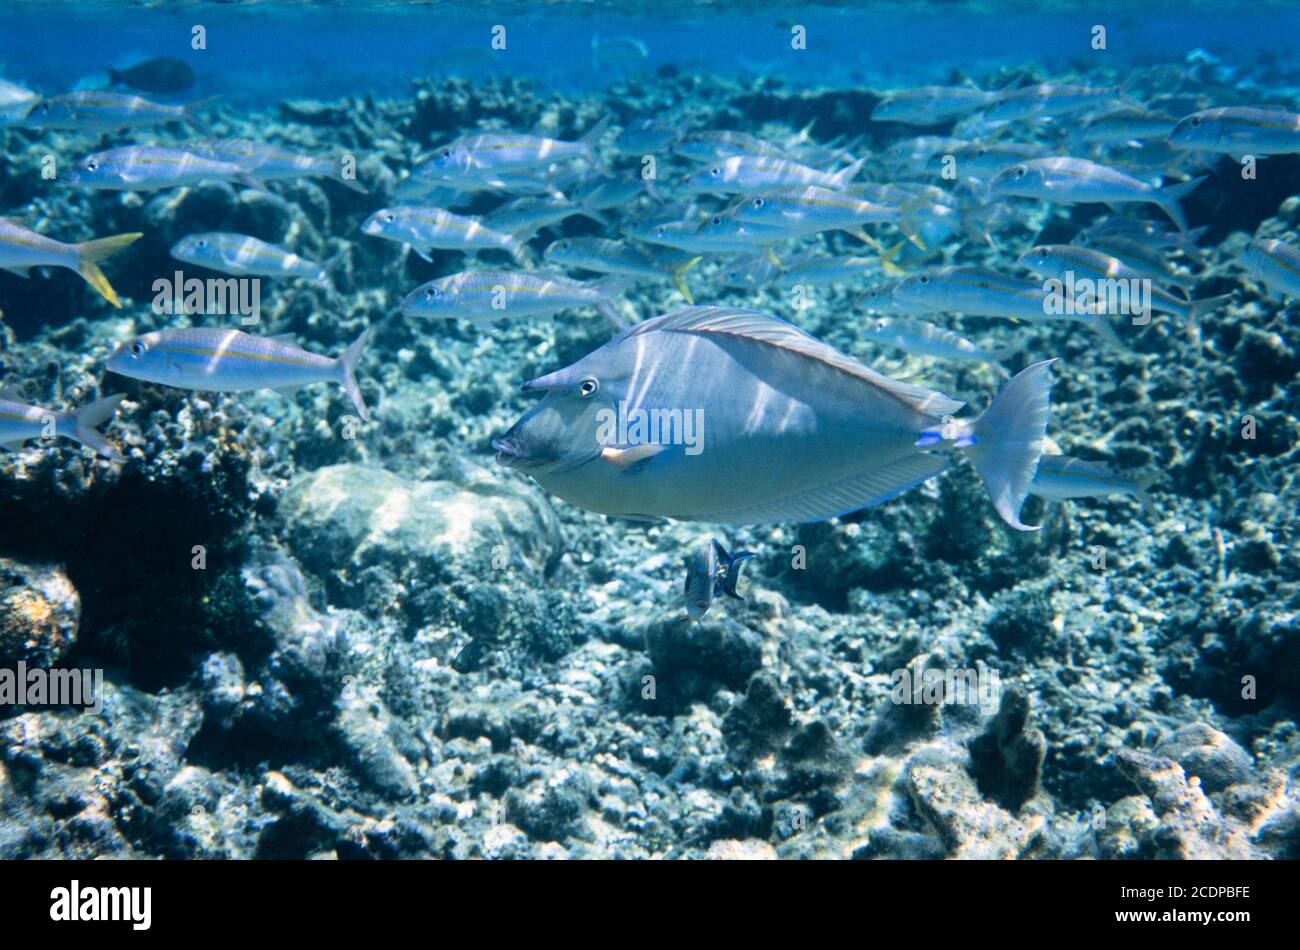 Maldives. Archive image 2003. High resolution scan from transparency, August 2020. Credit: Malcolm Park/Alamy. Stock Photo